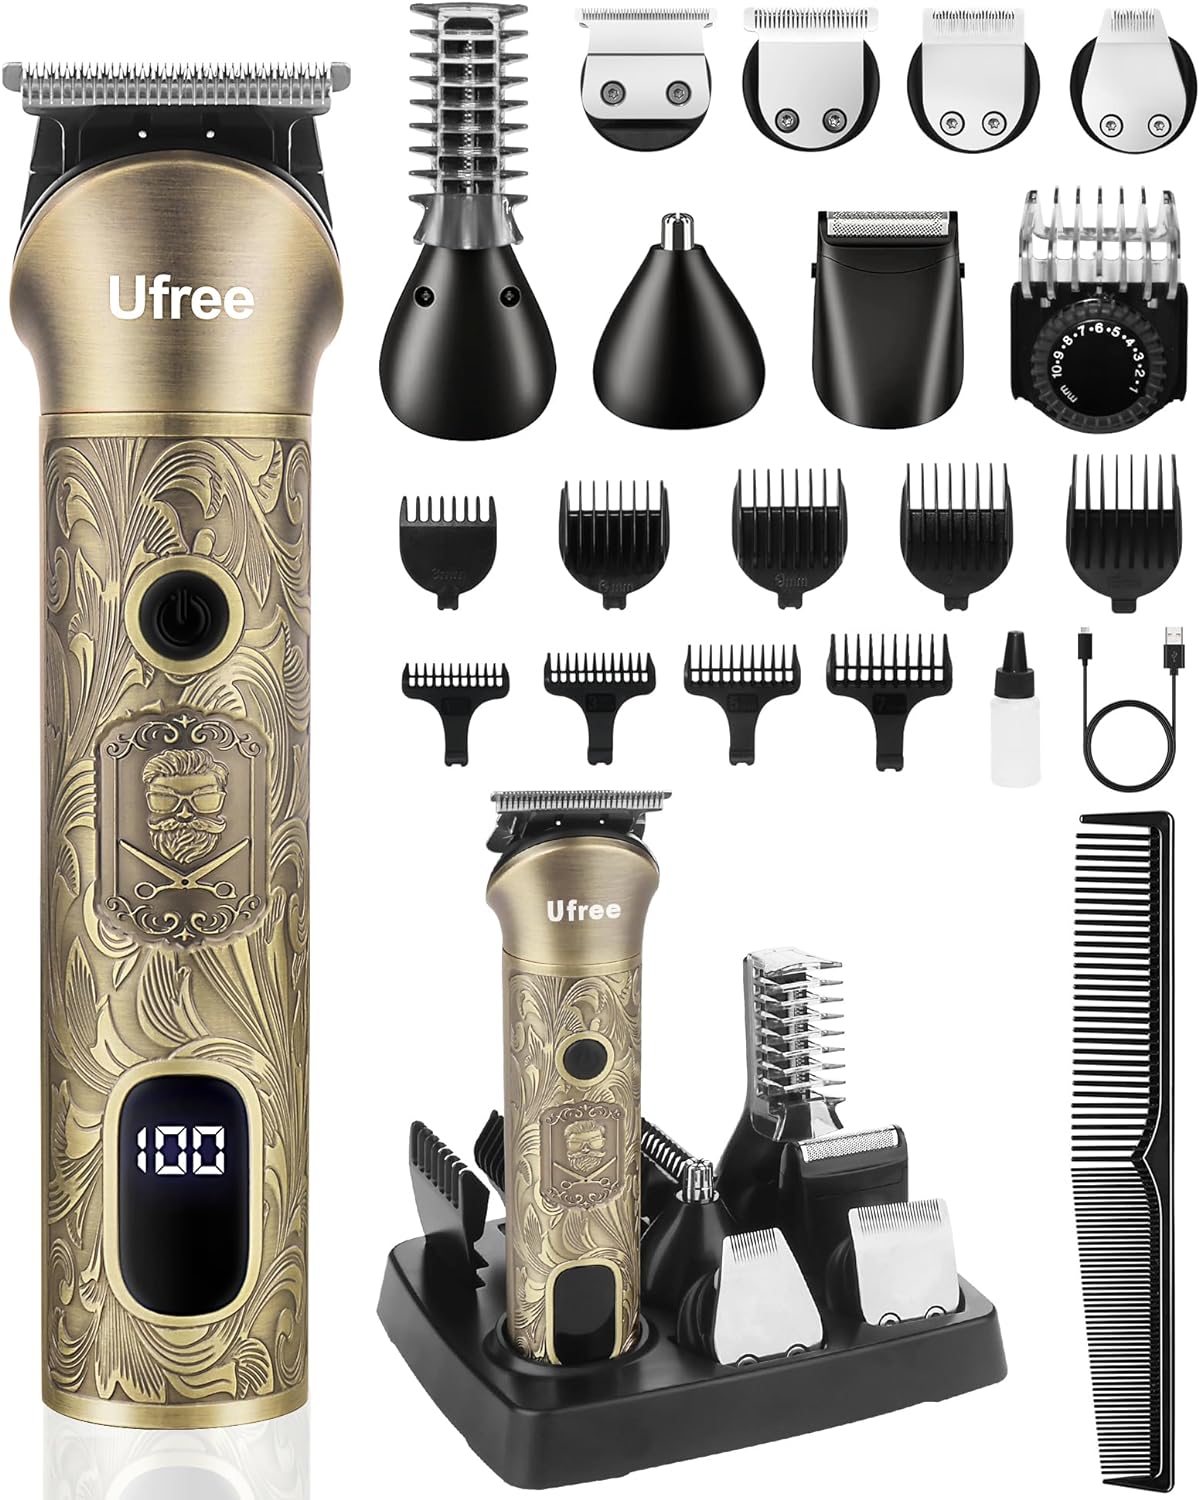 Shop Now for the Lowest Prices! Ufree Beard Trimmer for Men - Cordless Hair Clipper, Shaving Kit for Mustache Body Nose Ear Hair Facial - Electric Razor for Men 7 in 1 Beard Grooming Kit - Fathers Gifts for Dad